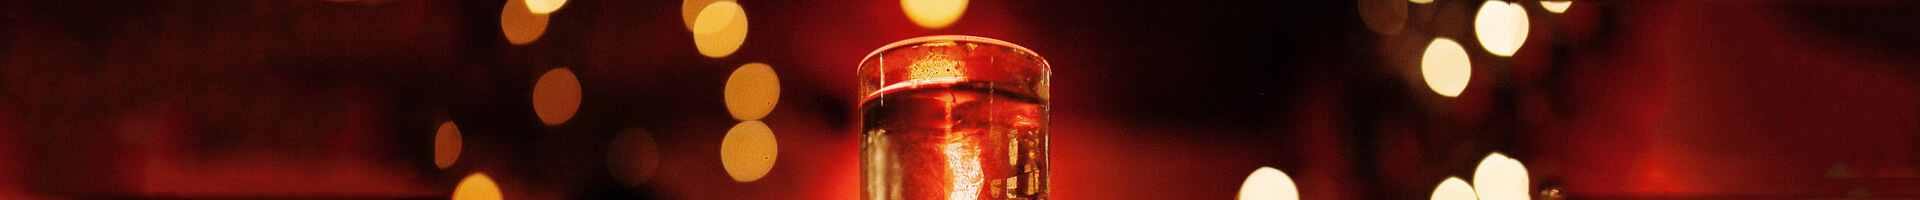 Filled shot glass in red-gold light.